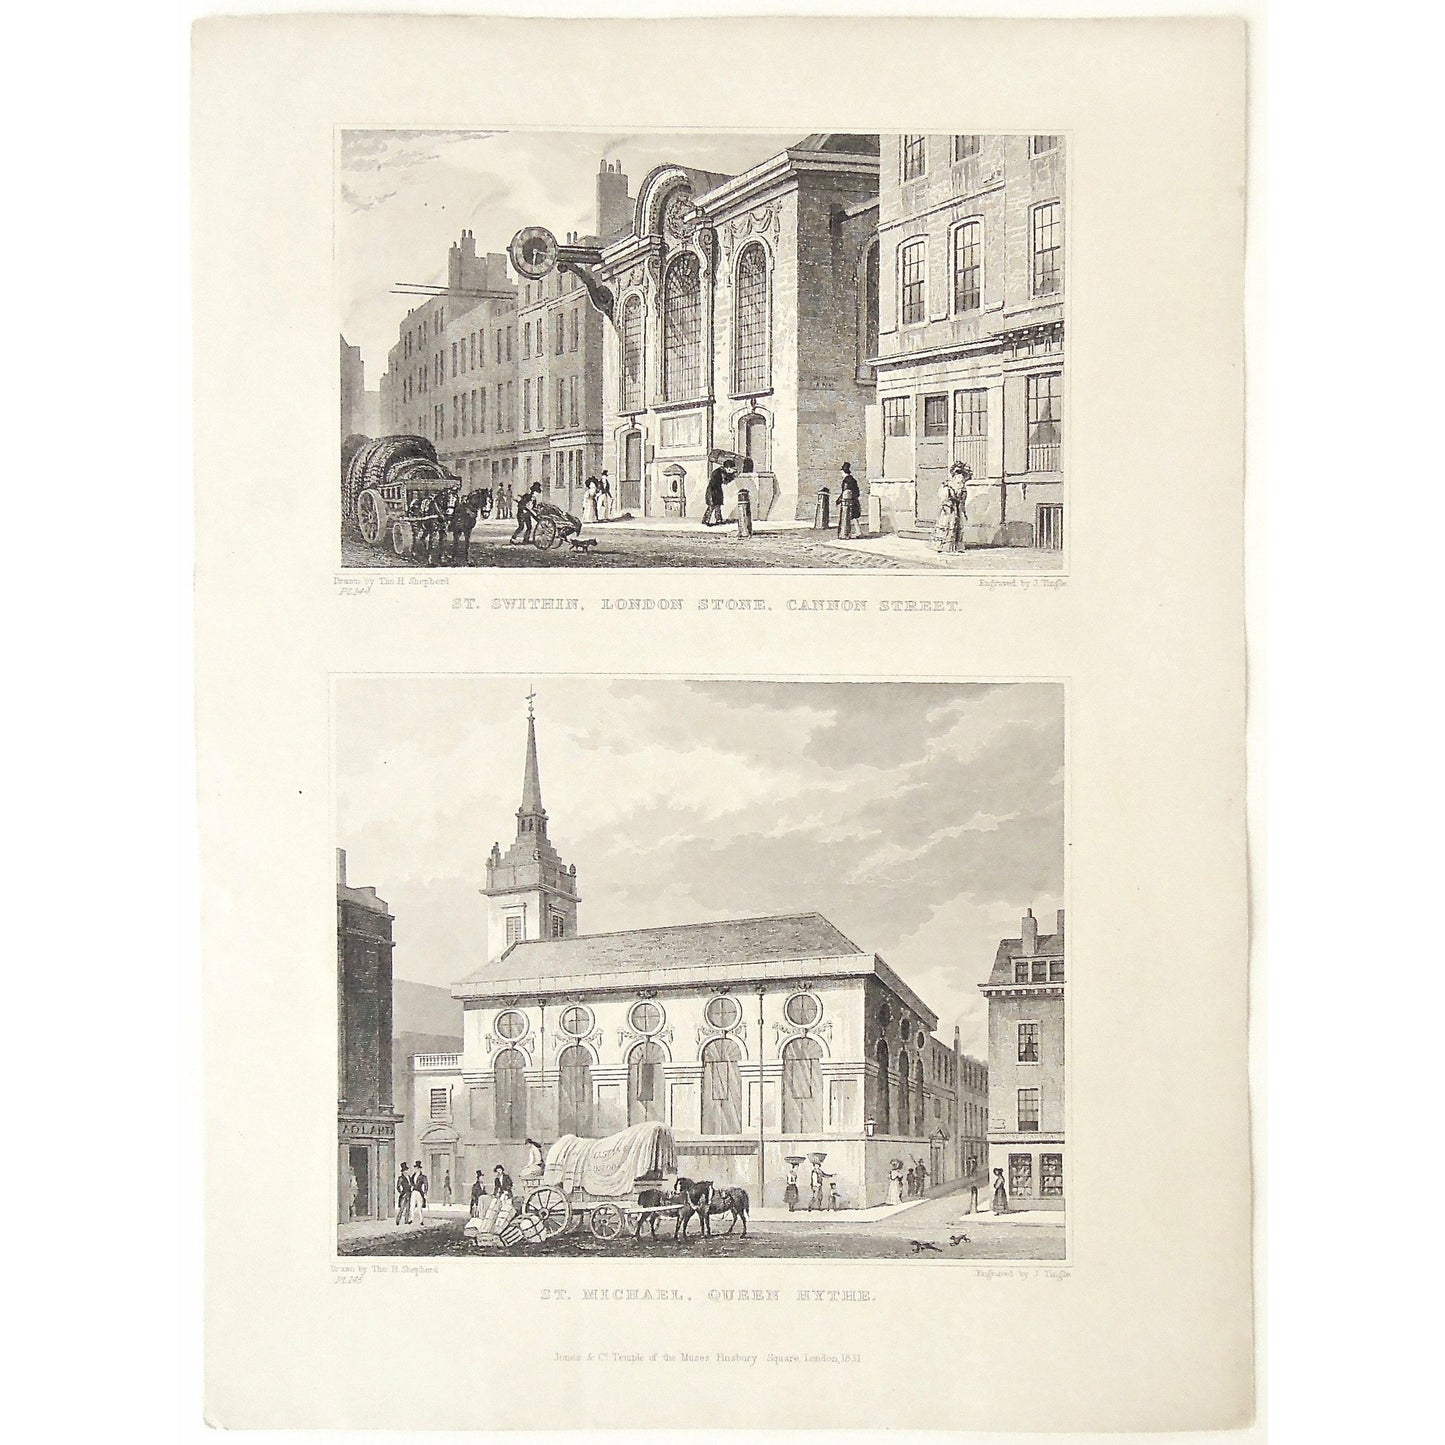 St. Swithin, London Stone, Cannon Street.  (S2-49a)